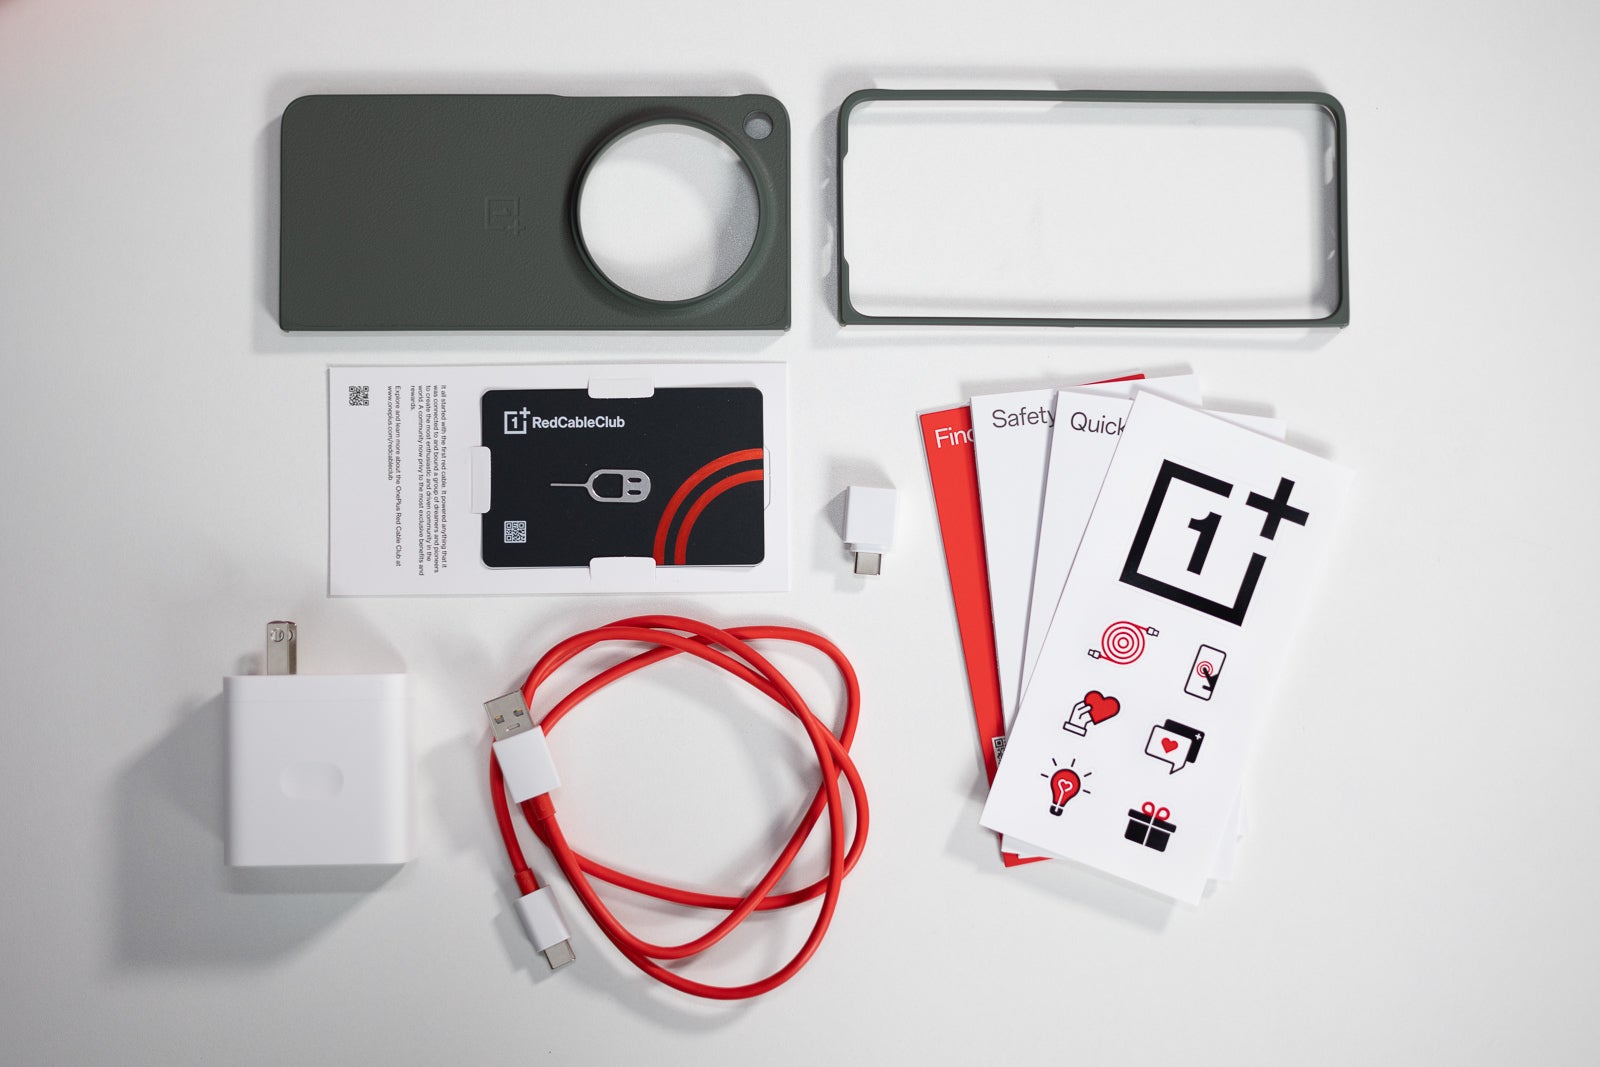 (Photo credit PhoneArena) OnePlus Open box contents. - OnePlus Open What’s in the box?